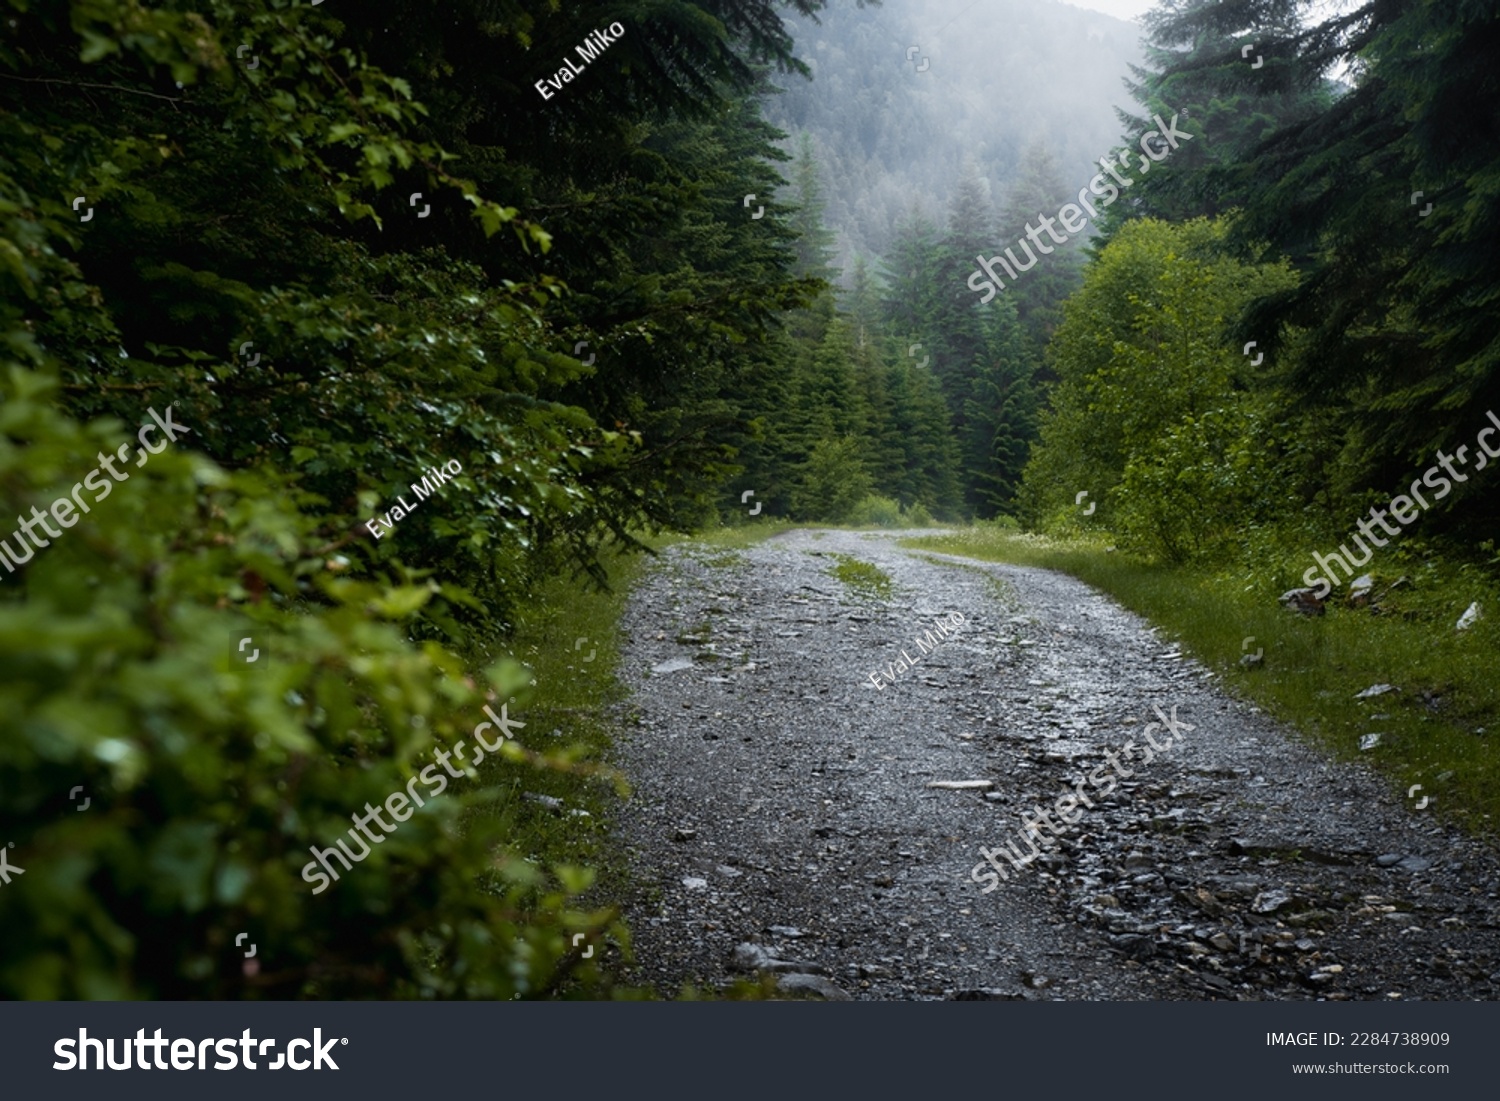 Forest trail scene. Woodland rocky path Forest in fog. Landscape with trees, colorful green and blue fog. Nature background. Dark foggy forest #2284738909